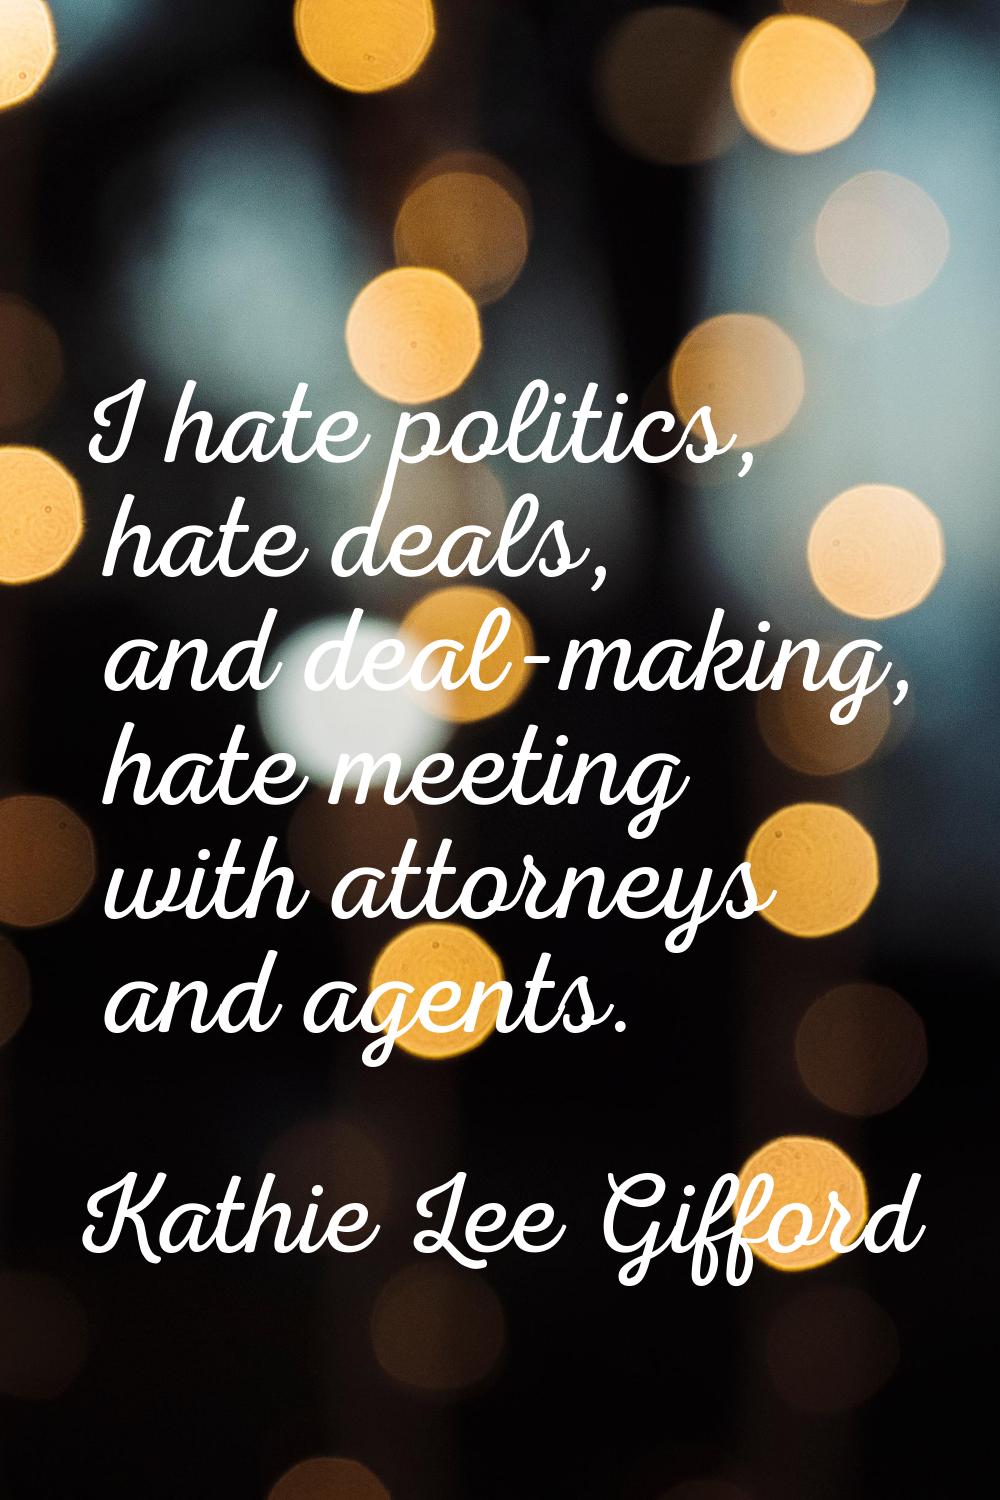 I hate politics, hate deals, and deal-making, hate meeting with attorneys and agents.